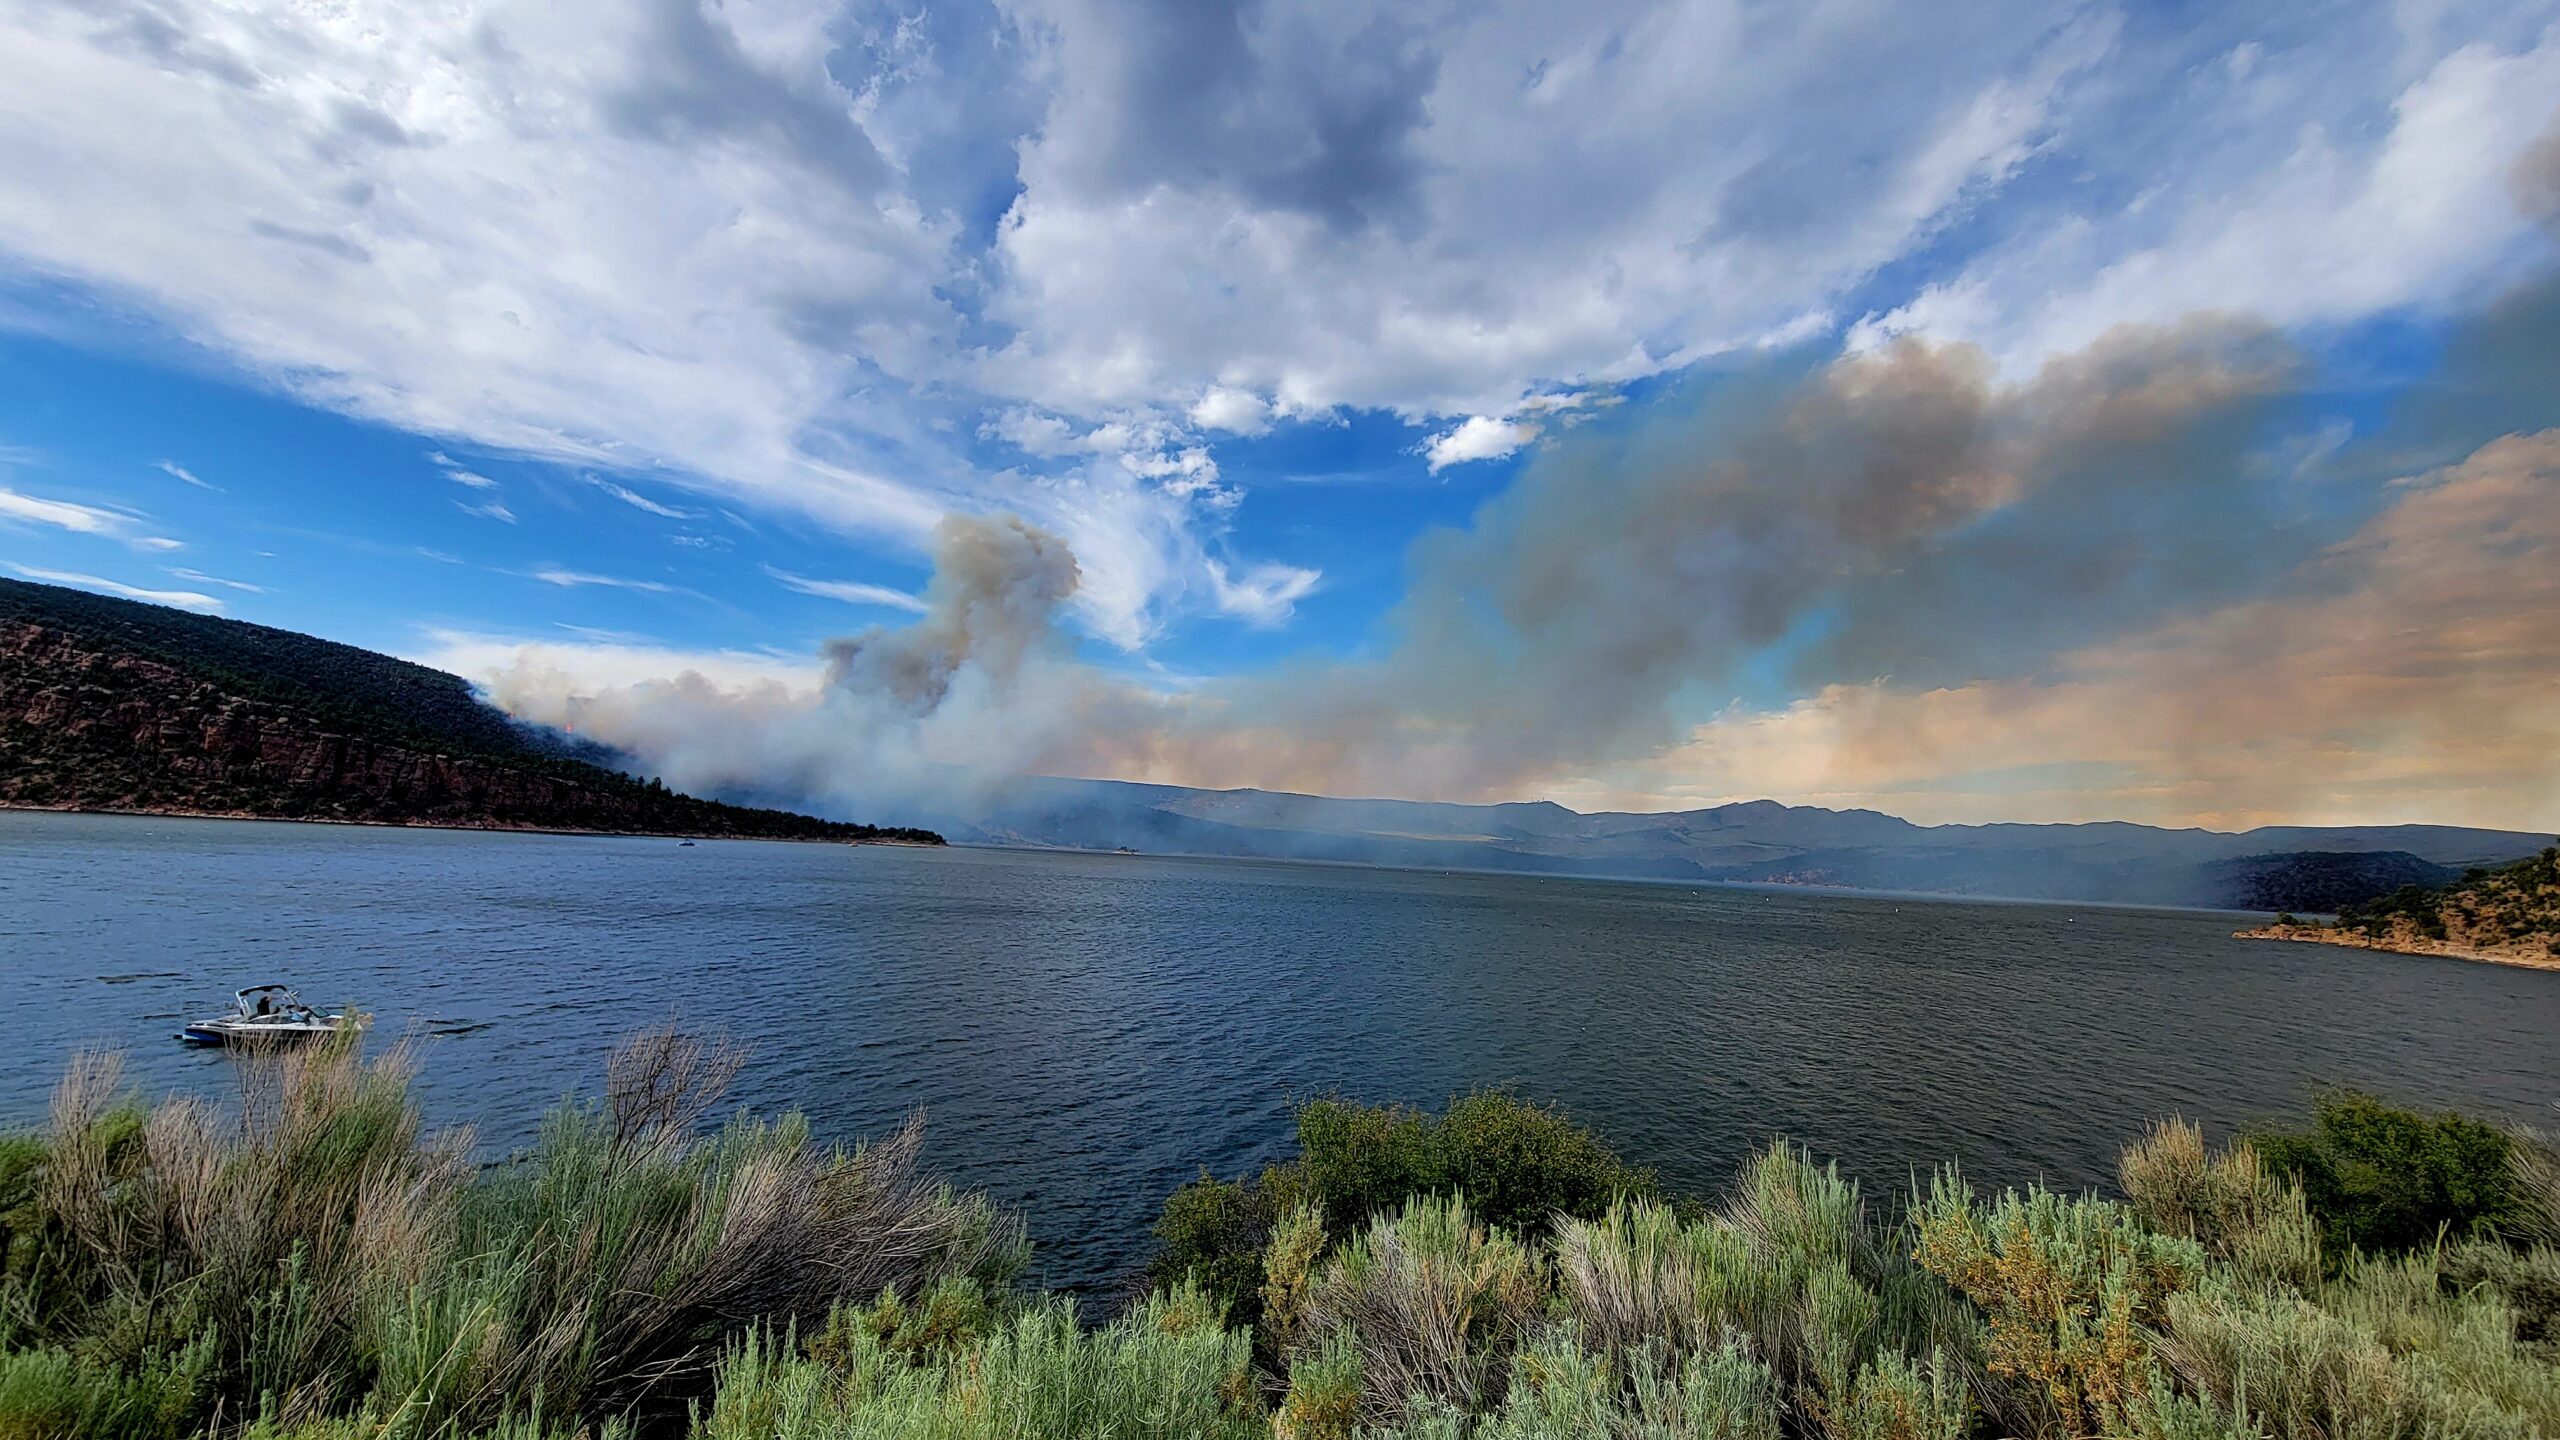 The Sunny Cove Fire, near Flaming Gorge Reservoir burns. This is one of the many wildfires Utah has...